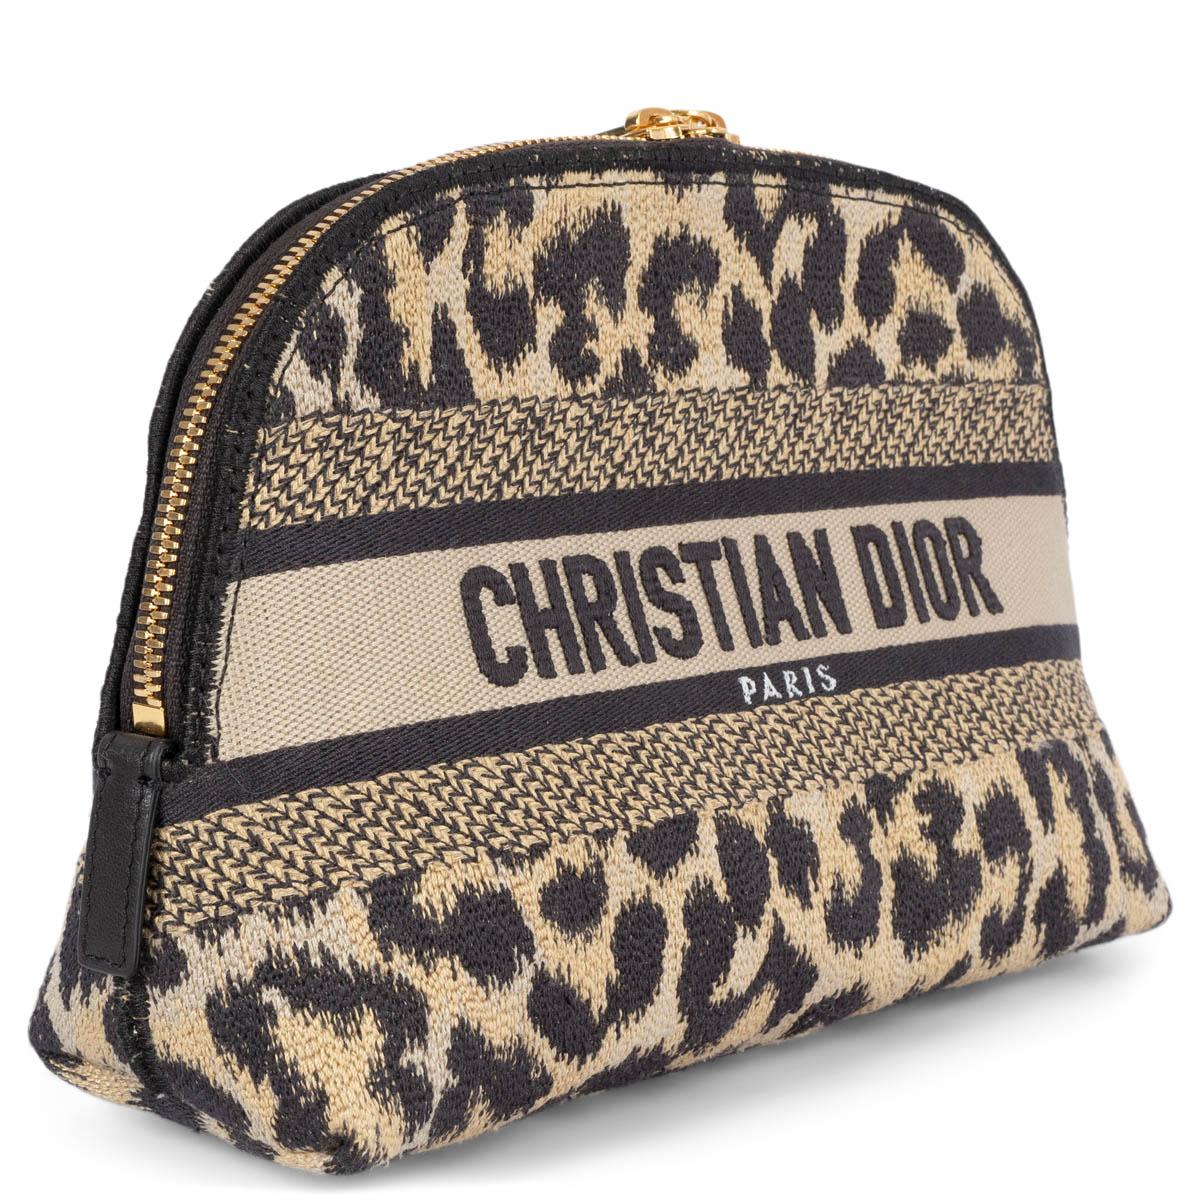 100% authentic Christian Dior 2022 domed pouch in beige mizza embroidery canvas. Opens with a zipper on top and is unlined. Has been carried once and is in virtually new condition. 

Measurements
Height	16cm (6.2in)
Width	23cm (9in)
Depth	8cm